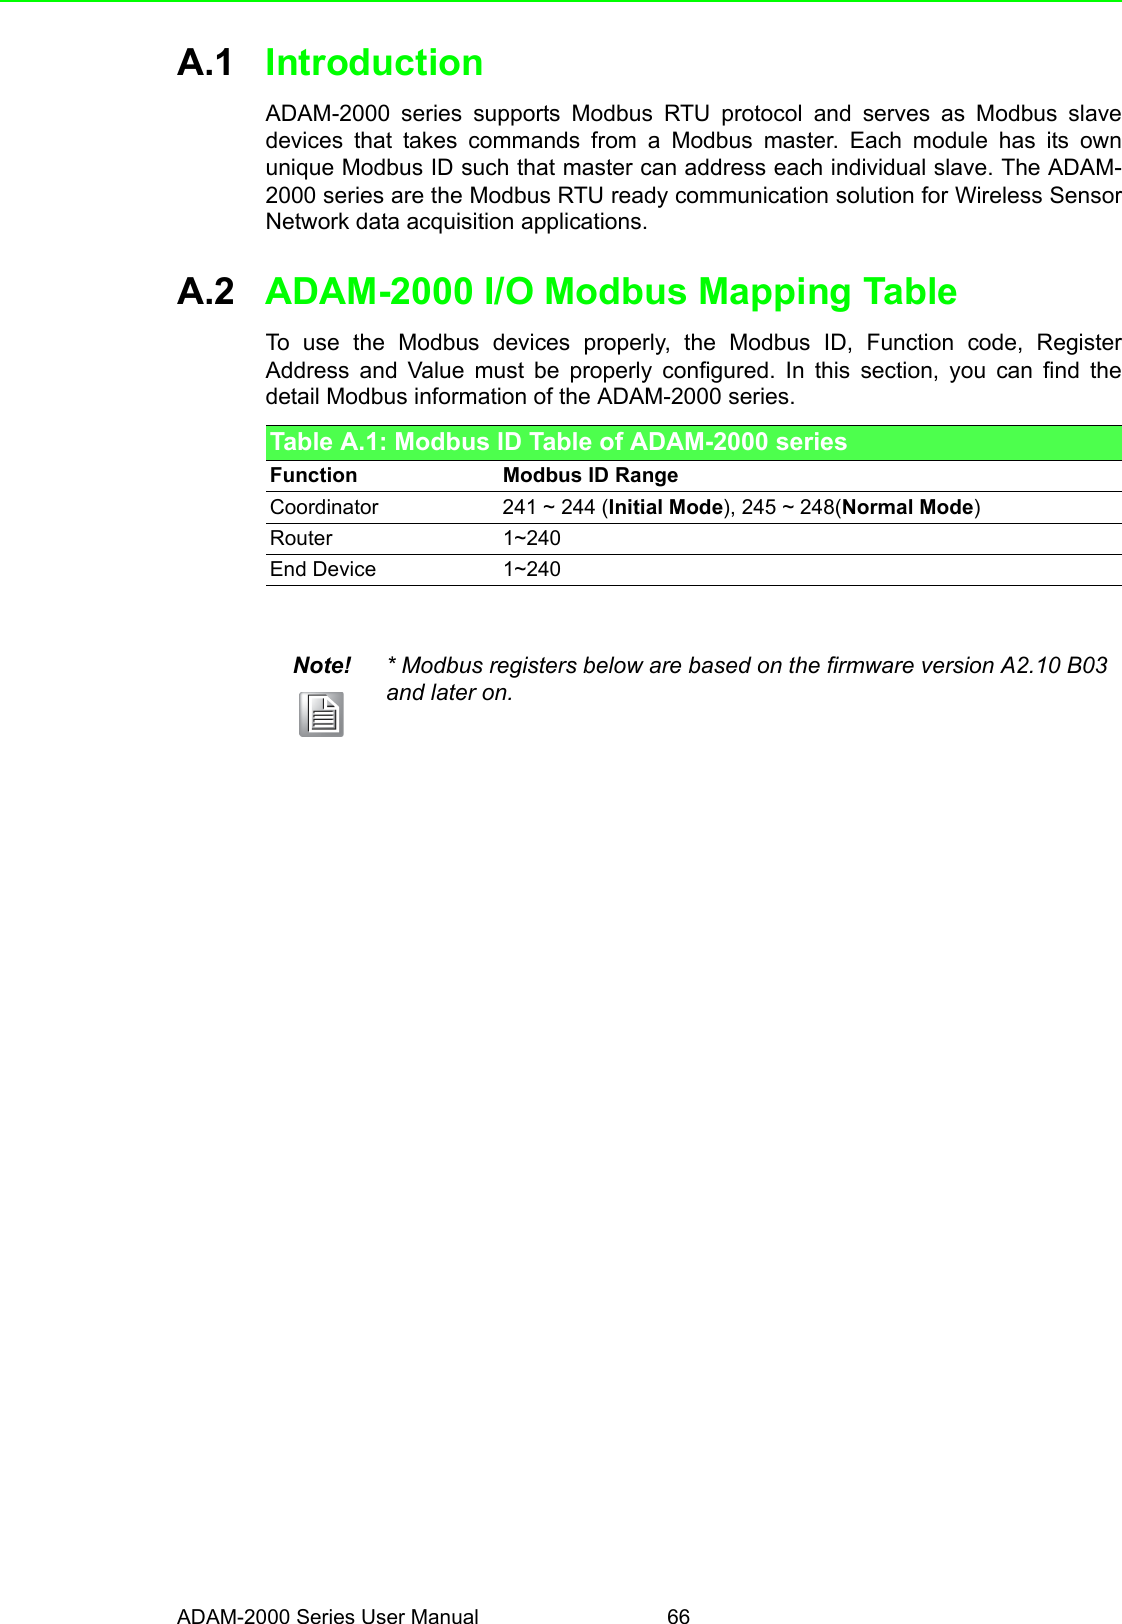 ADAM-2000 Series User Manual 66A.1 IntroductionADAM-2000 series supports Modbus RTU protocol and serves as Modbus slavedevices that takes commands from a Modbus master. Each module has its ownunique Modbus ID such that master can address each individual slave. The ADAM-2000 series are the Modbus RTU ready communication solution for Wireless SensorNetwork data acquisition applications.A.2 ADAM-2000 I/O Modbus Mapping Table To use the Modbus devices properly, the Modbus ID, Function code, RegisterAddress and Value must be properly configured. In this section, you can find thedetail Modbus information of the ADAM-2000 series.Table A.1: Modbus ID Table of ADAM-2000 seriesFunction Modbus ID RangeCoordinator 241 ~ 244 (Initial Mode), 245 ~ 248(Normal Mode)Router 1~240End Device 1~240Note! * Modbus registers below are based on the firmware version A2.10 B03 and later on.